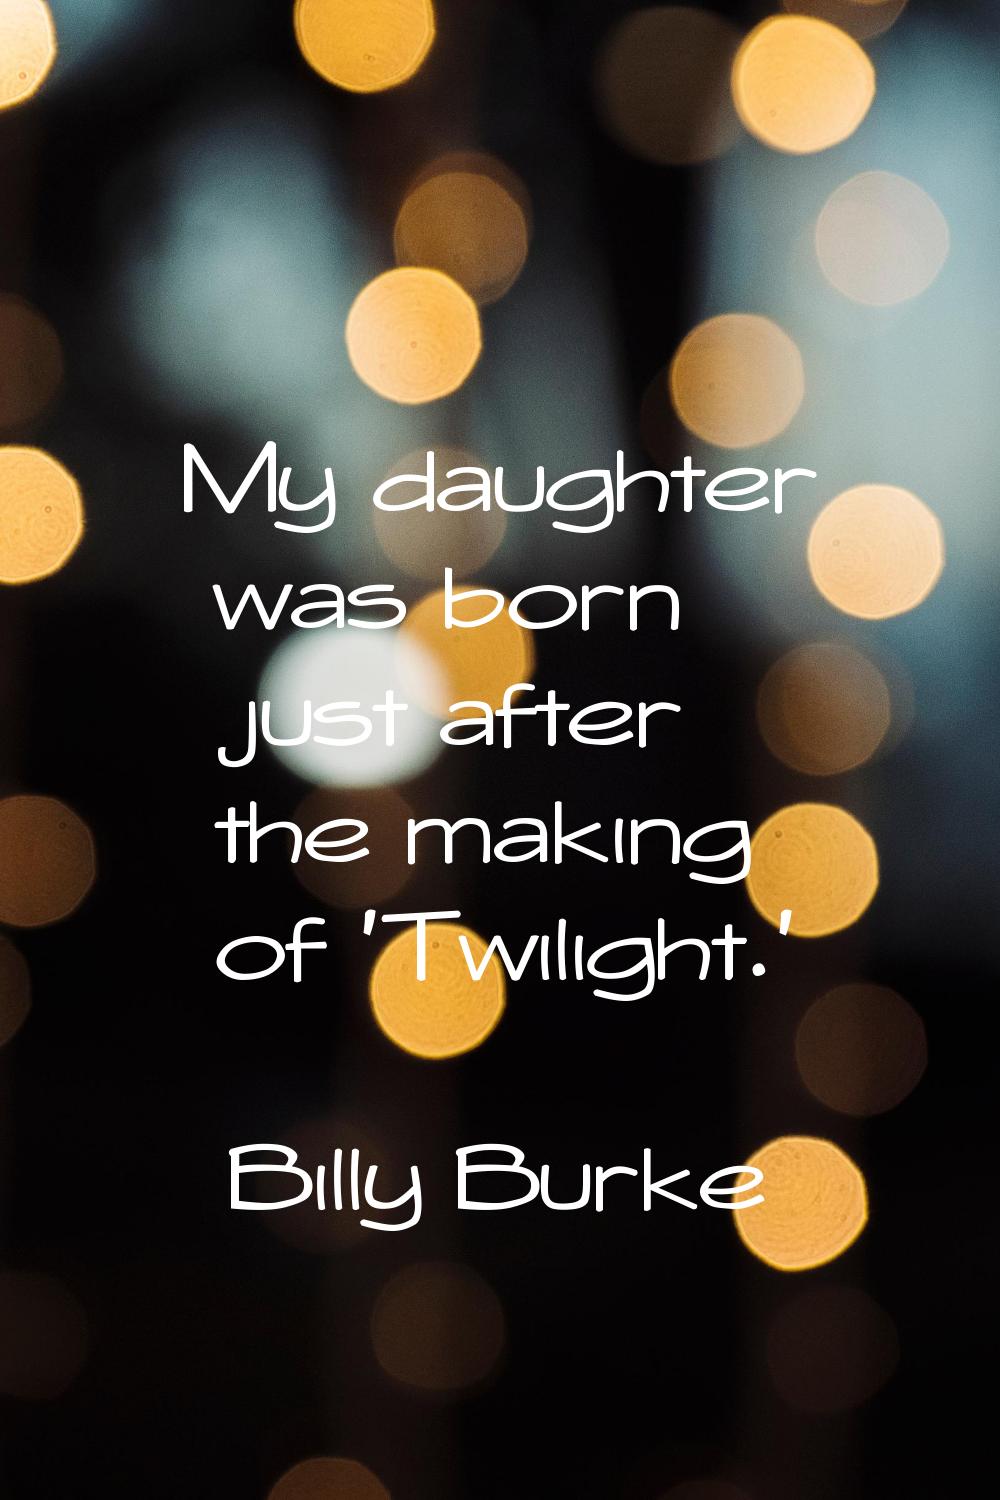 My daughter was born just after the making of 'Twilight.'